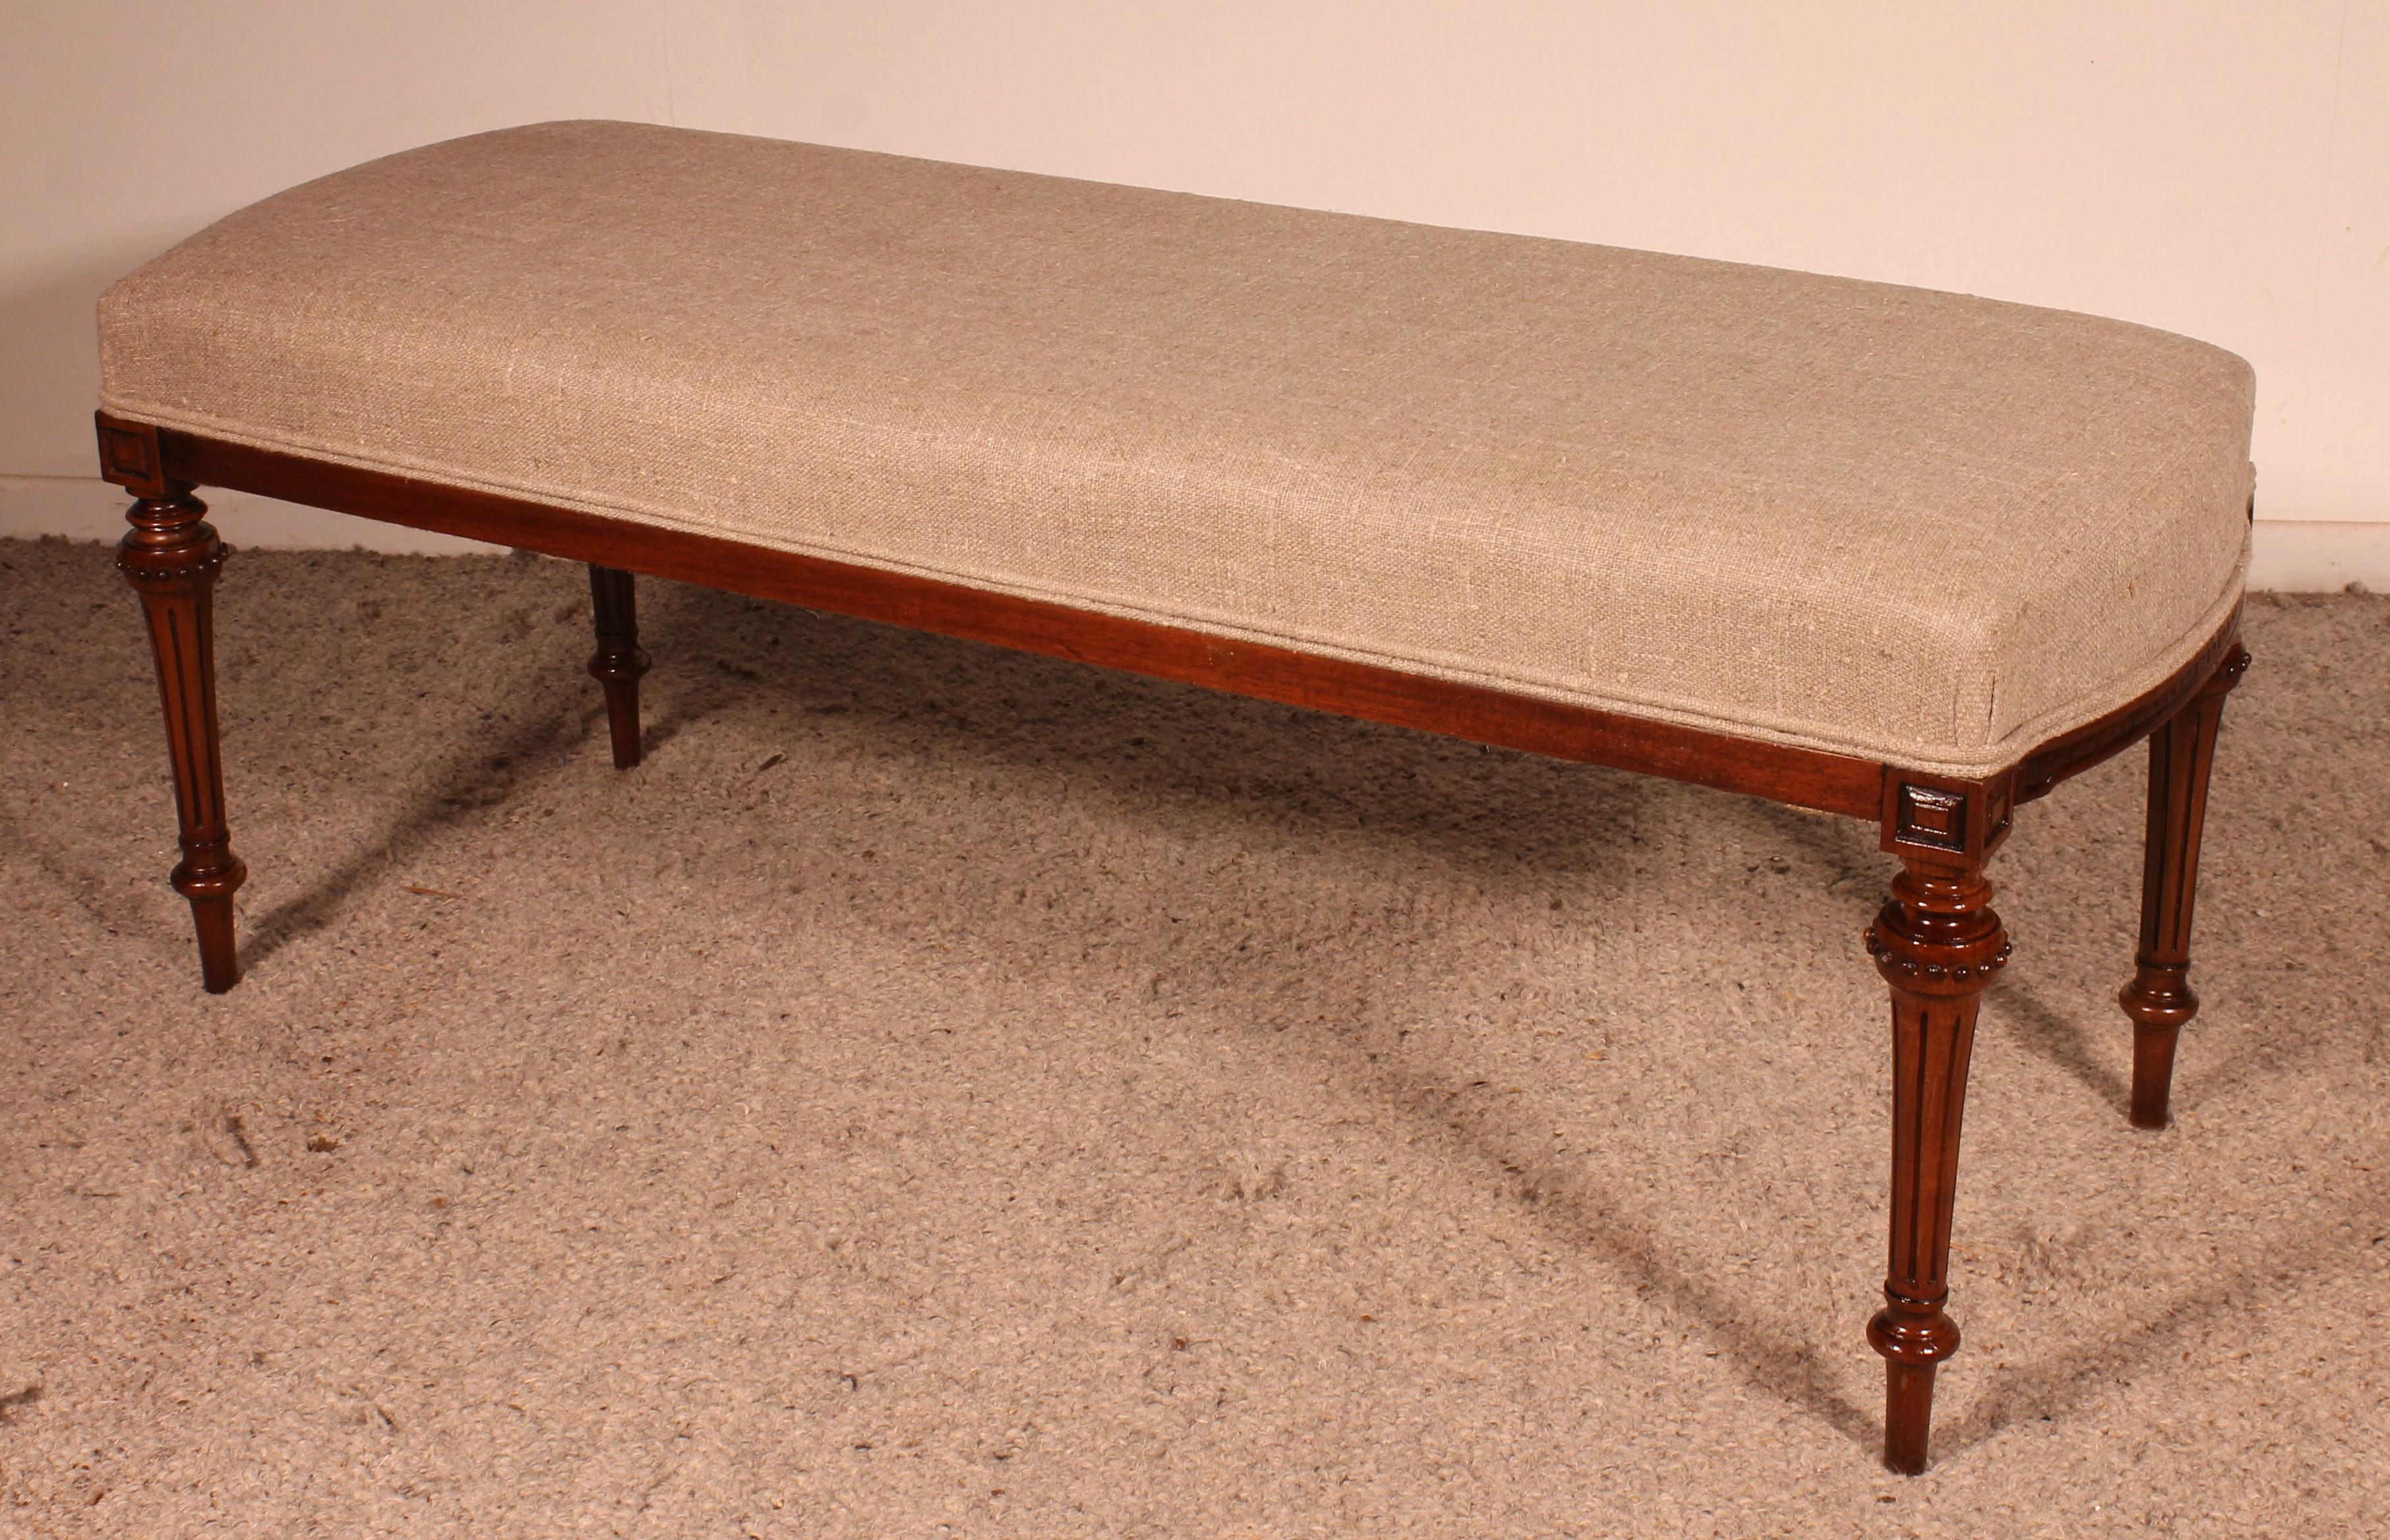 Mahogany Bench From The 19th Century Covered With A Linen Fabric 1